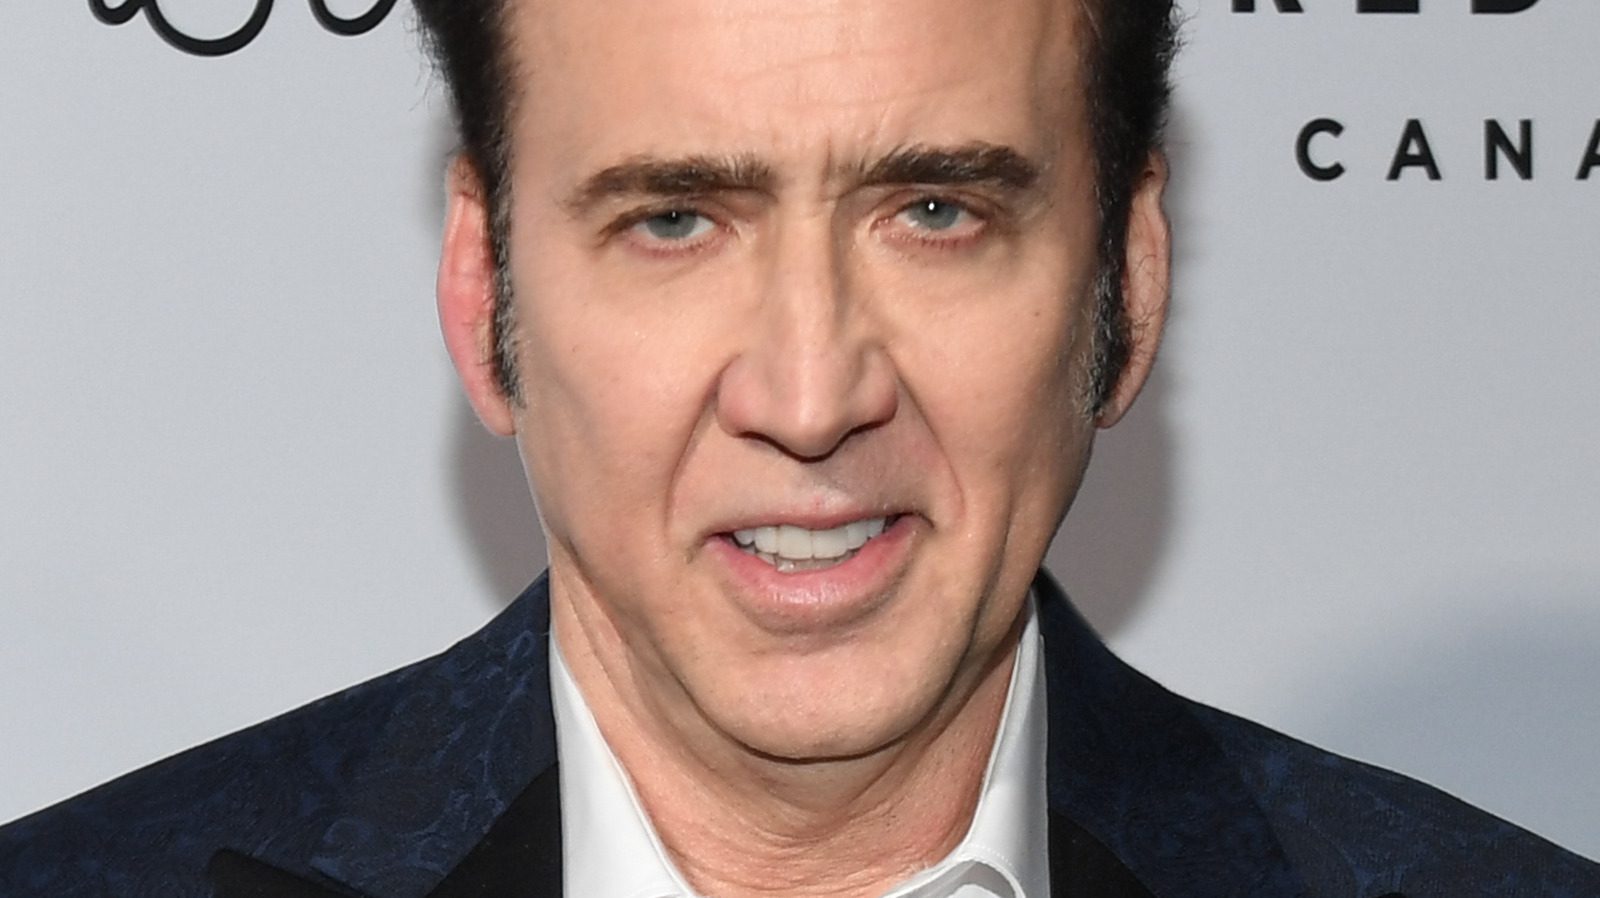 Nic Cage Said His Hero Is Elvis Aka His Ex-Wife Lisa Marie Presley's Father